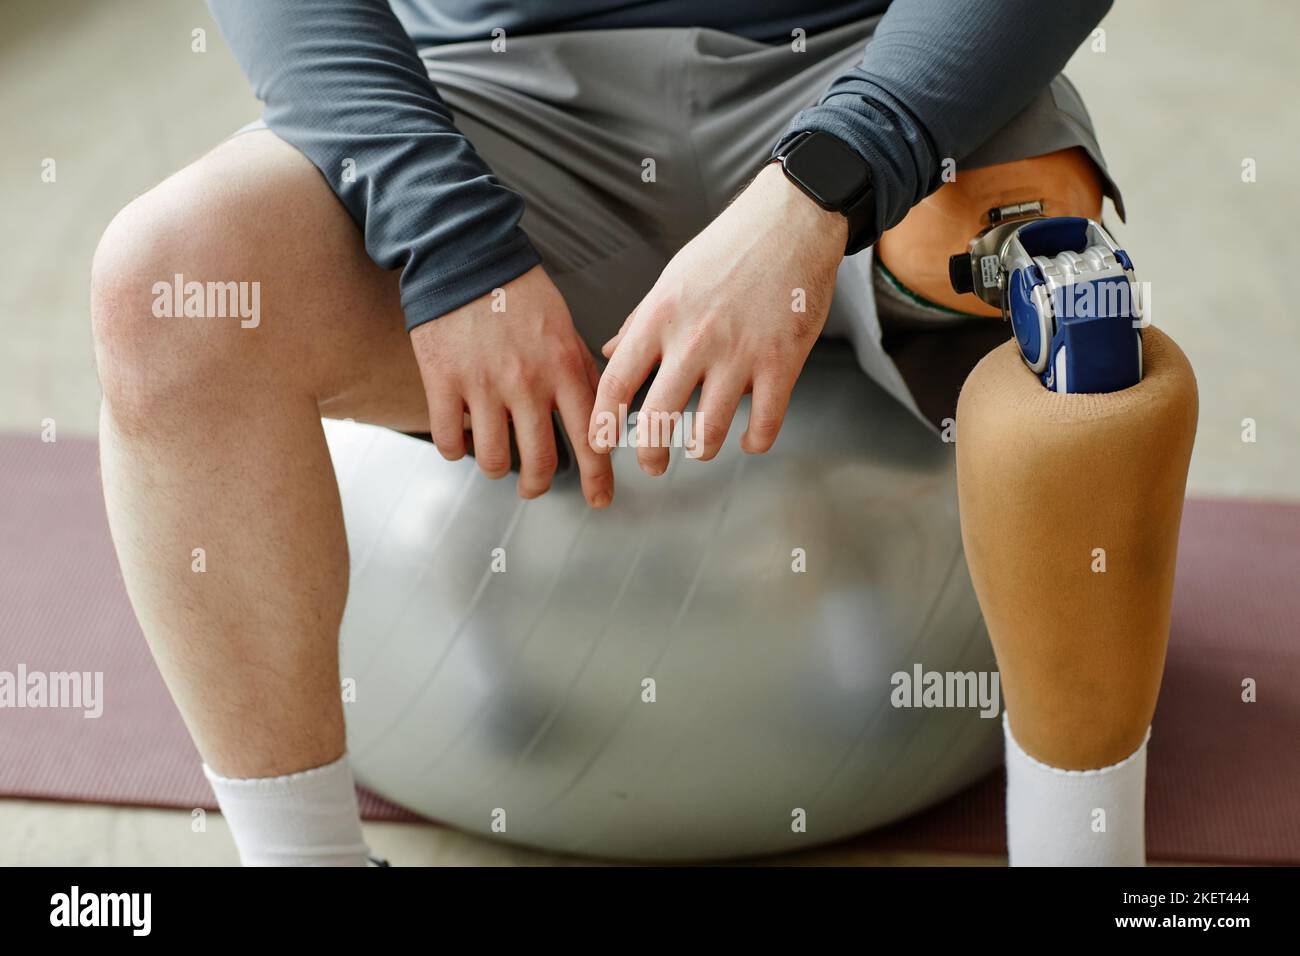 Close up of man with prosthetic leg sitting on fitness ball during home workout Stock Photo